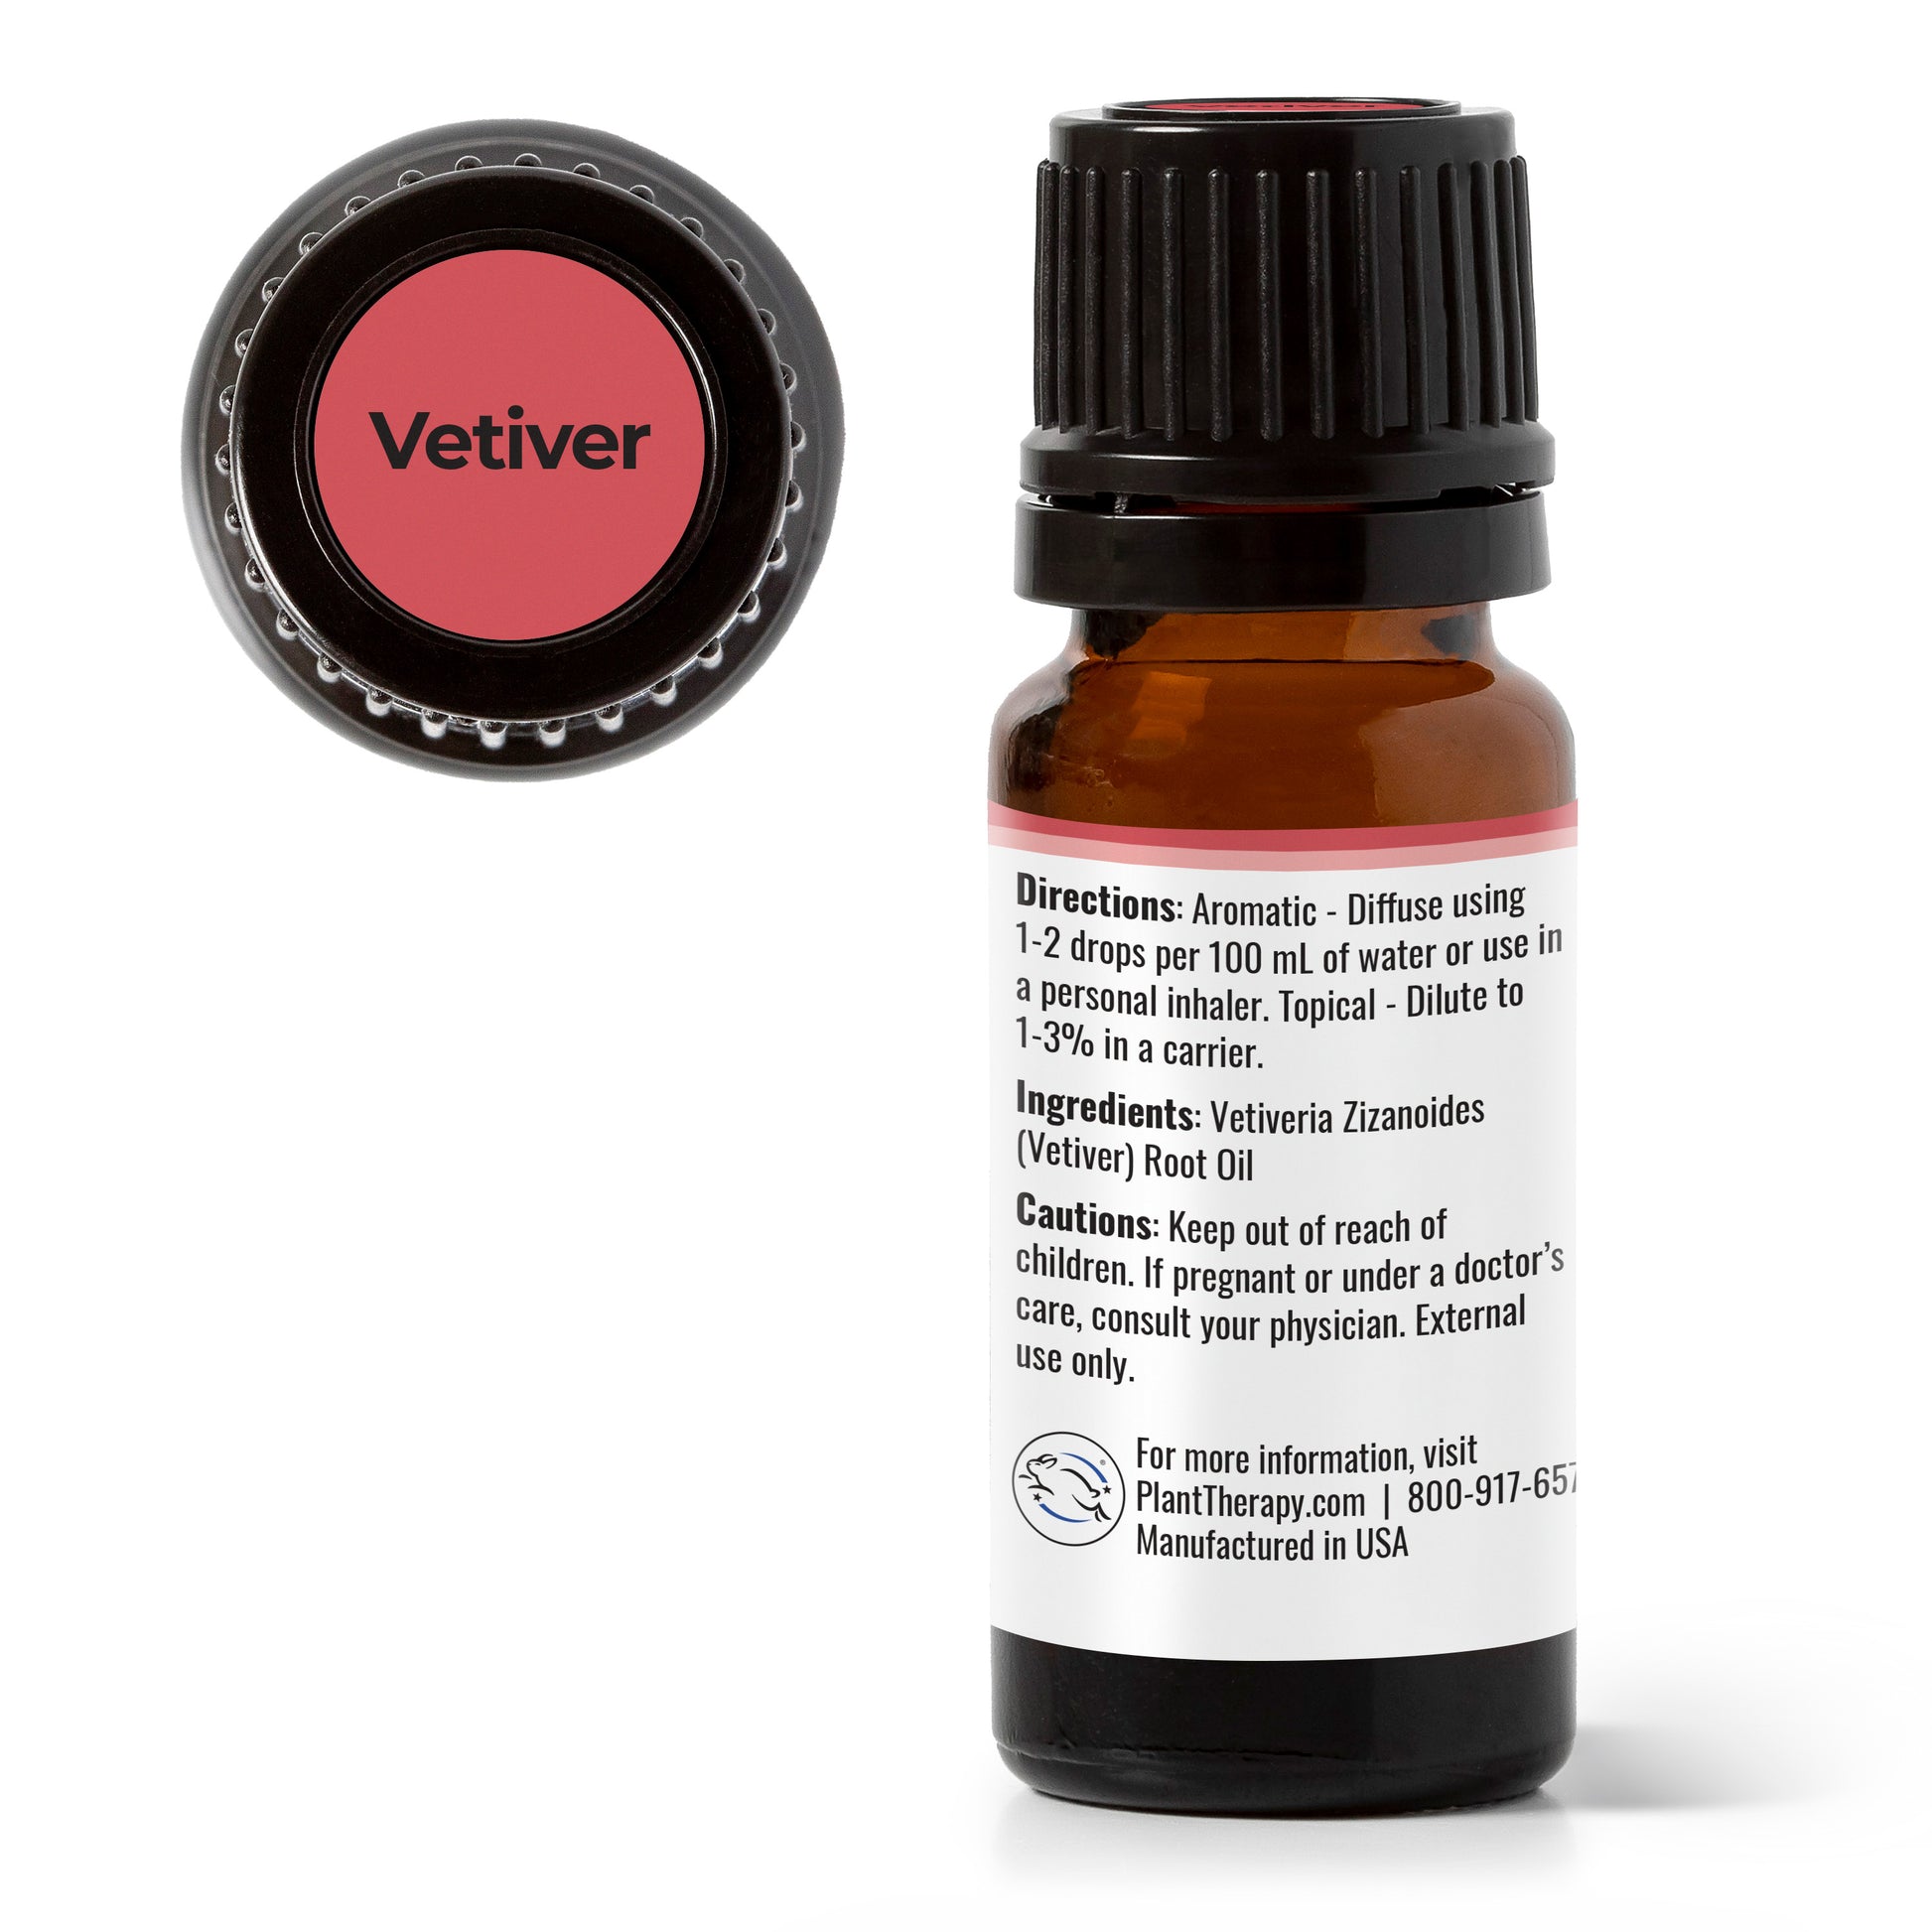 Vetiver Essential Oil – Plant Therapy